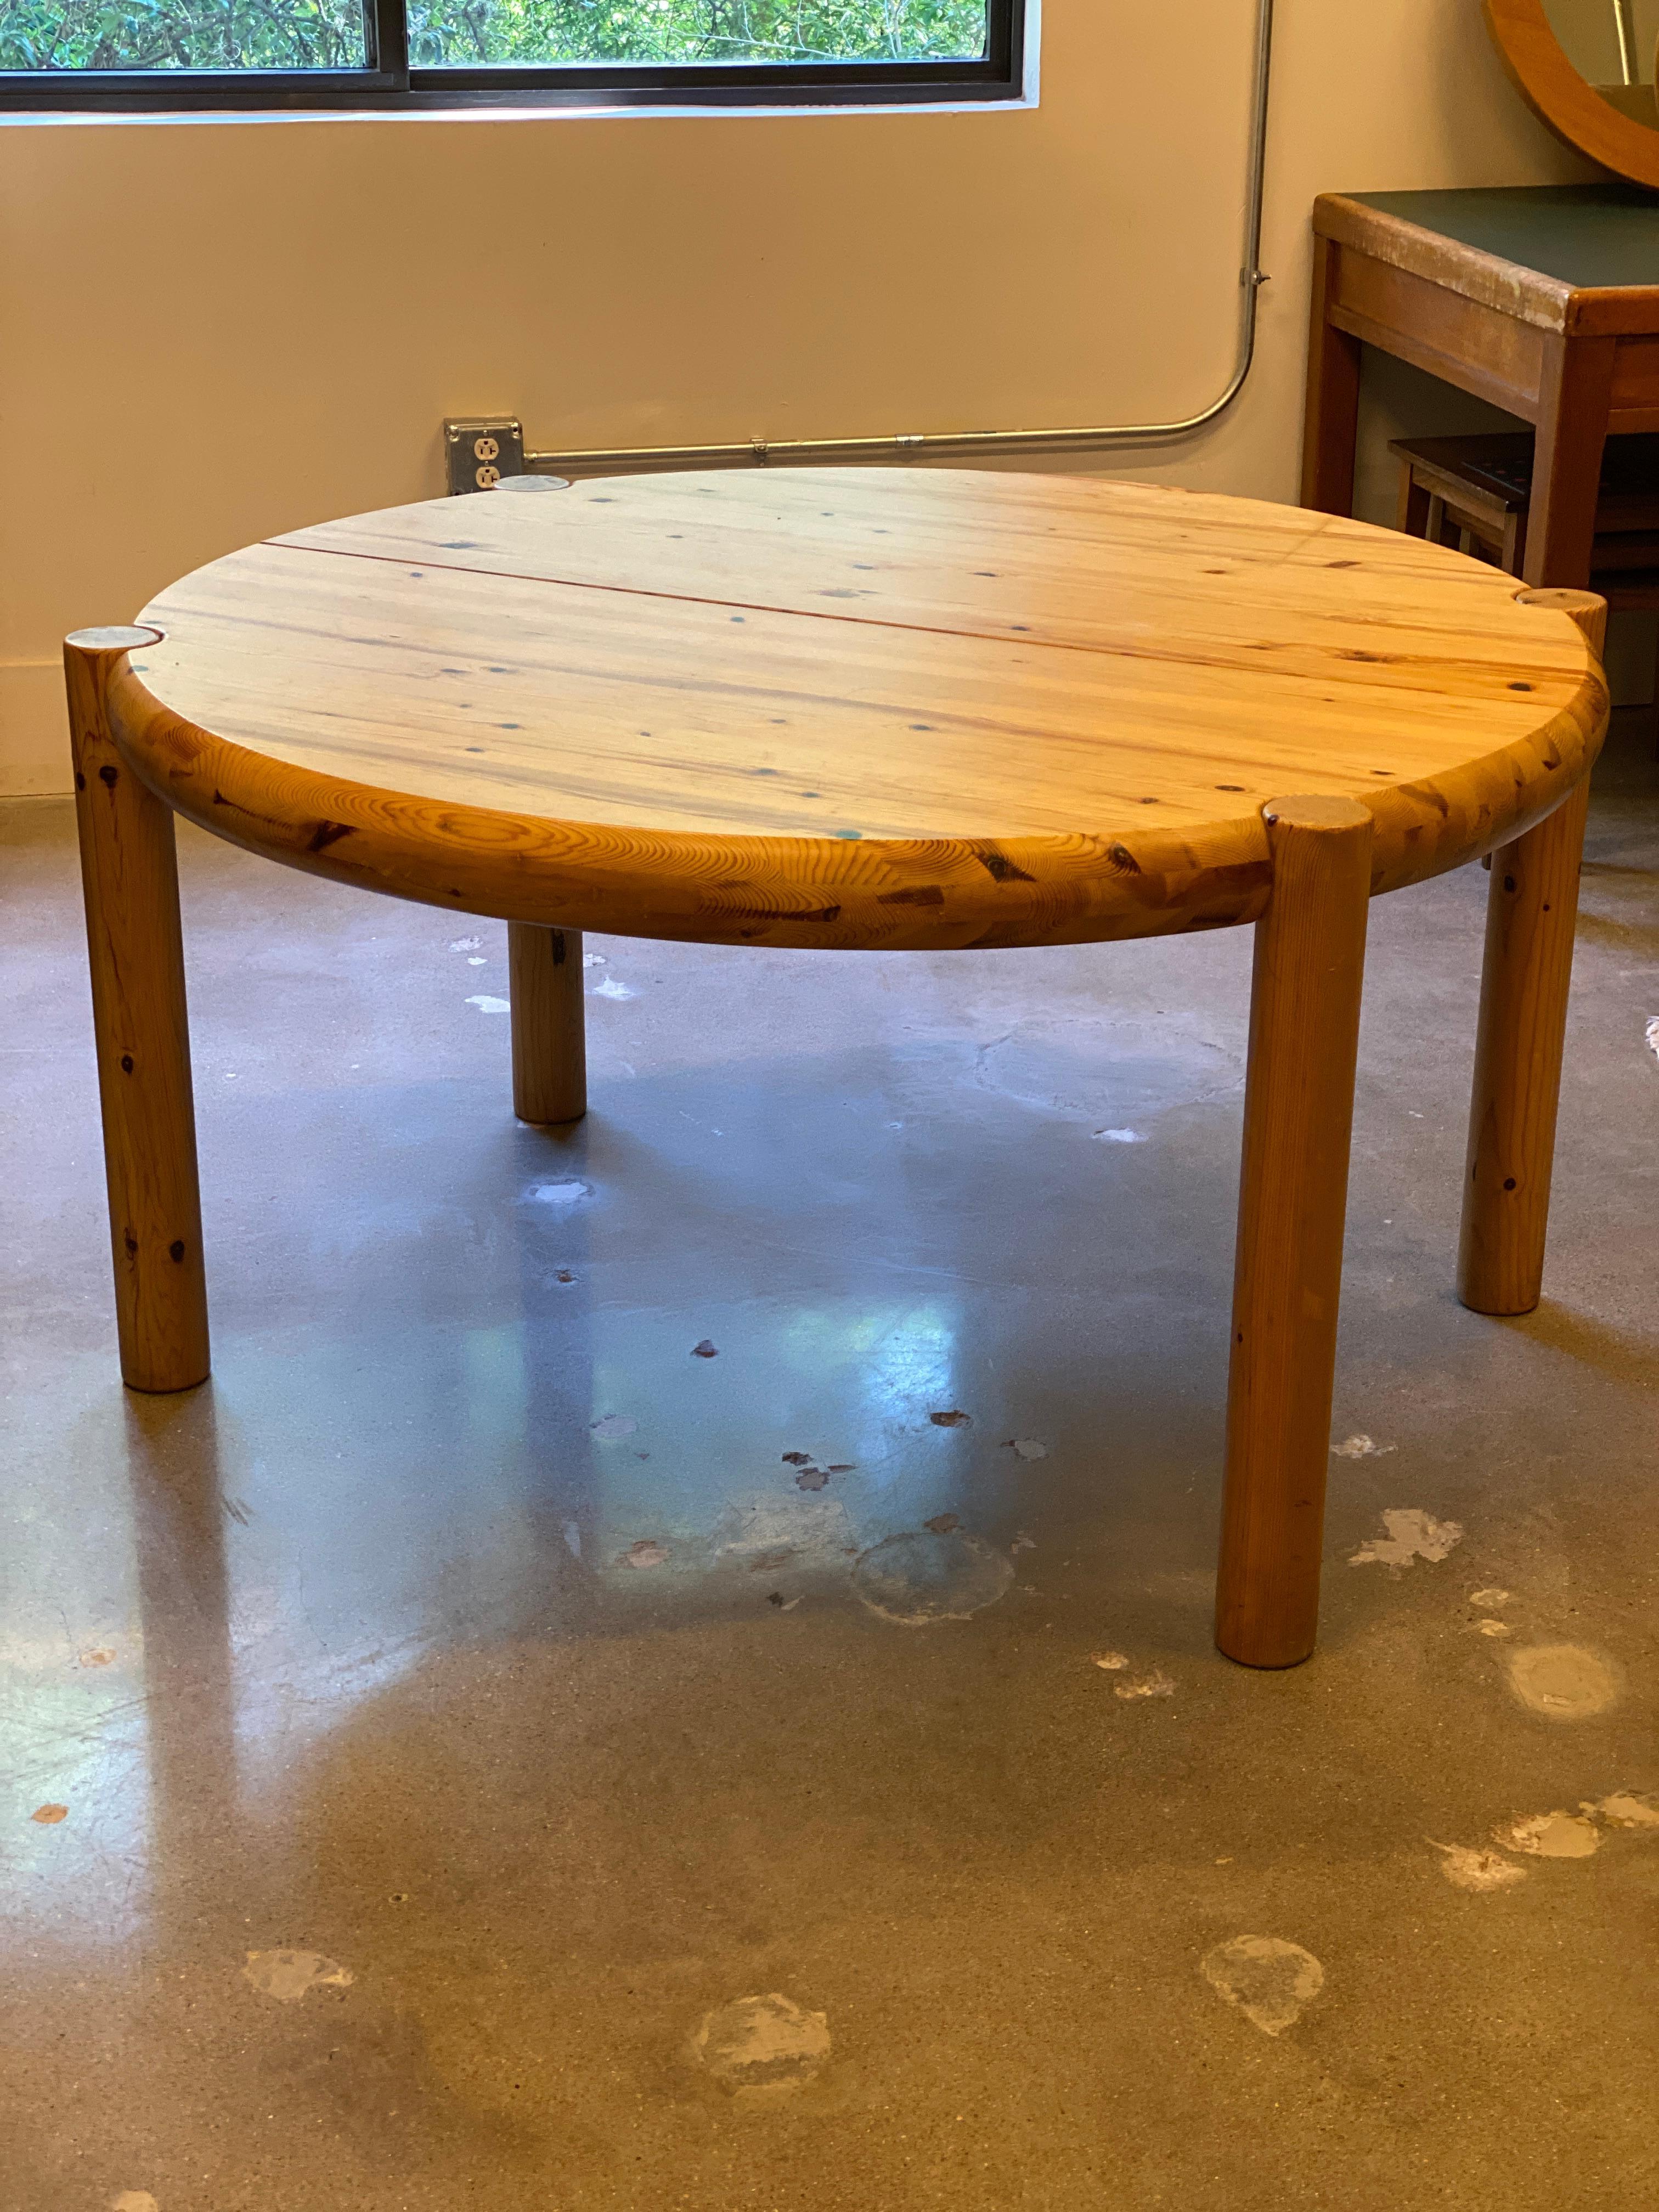 Mid-Century Modern or Scandinavian Modern dining table designed by Rainer Daumiller, Danish architect and designer. Round with four legs and extendable to oval with 23